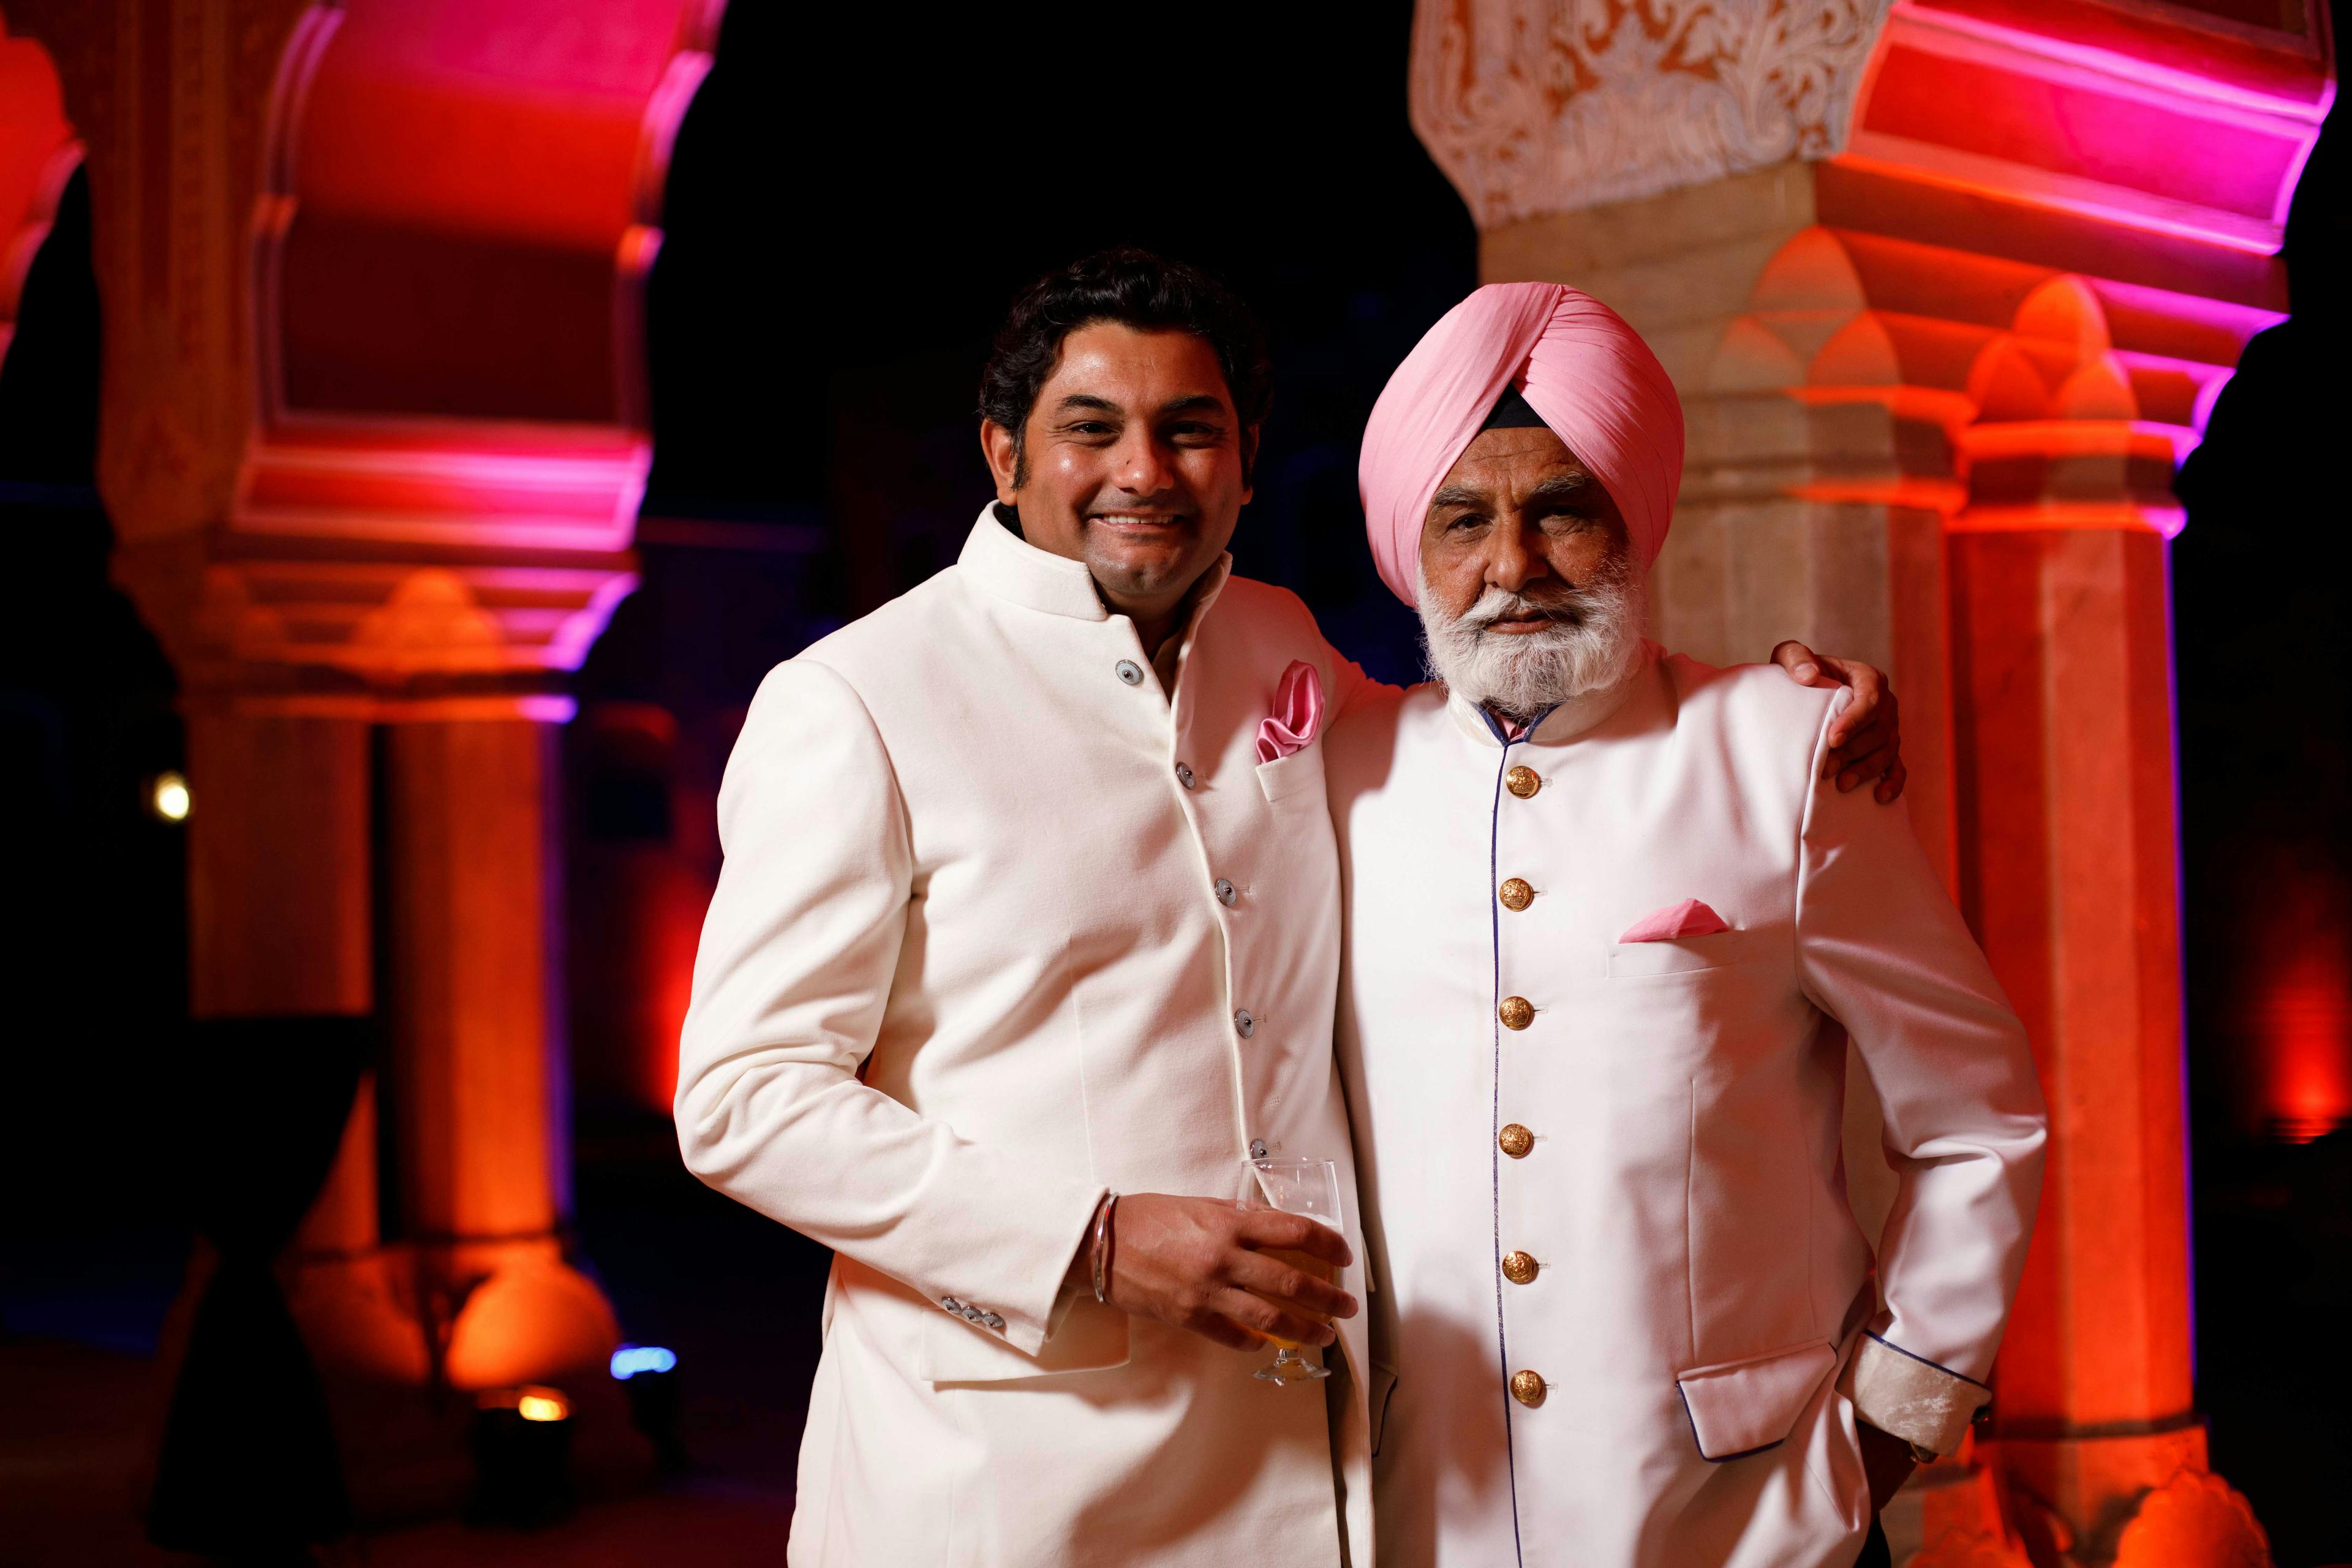 Col. K. S Garcha and Harinder pose for the gala